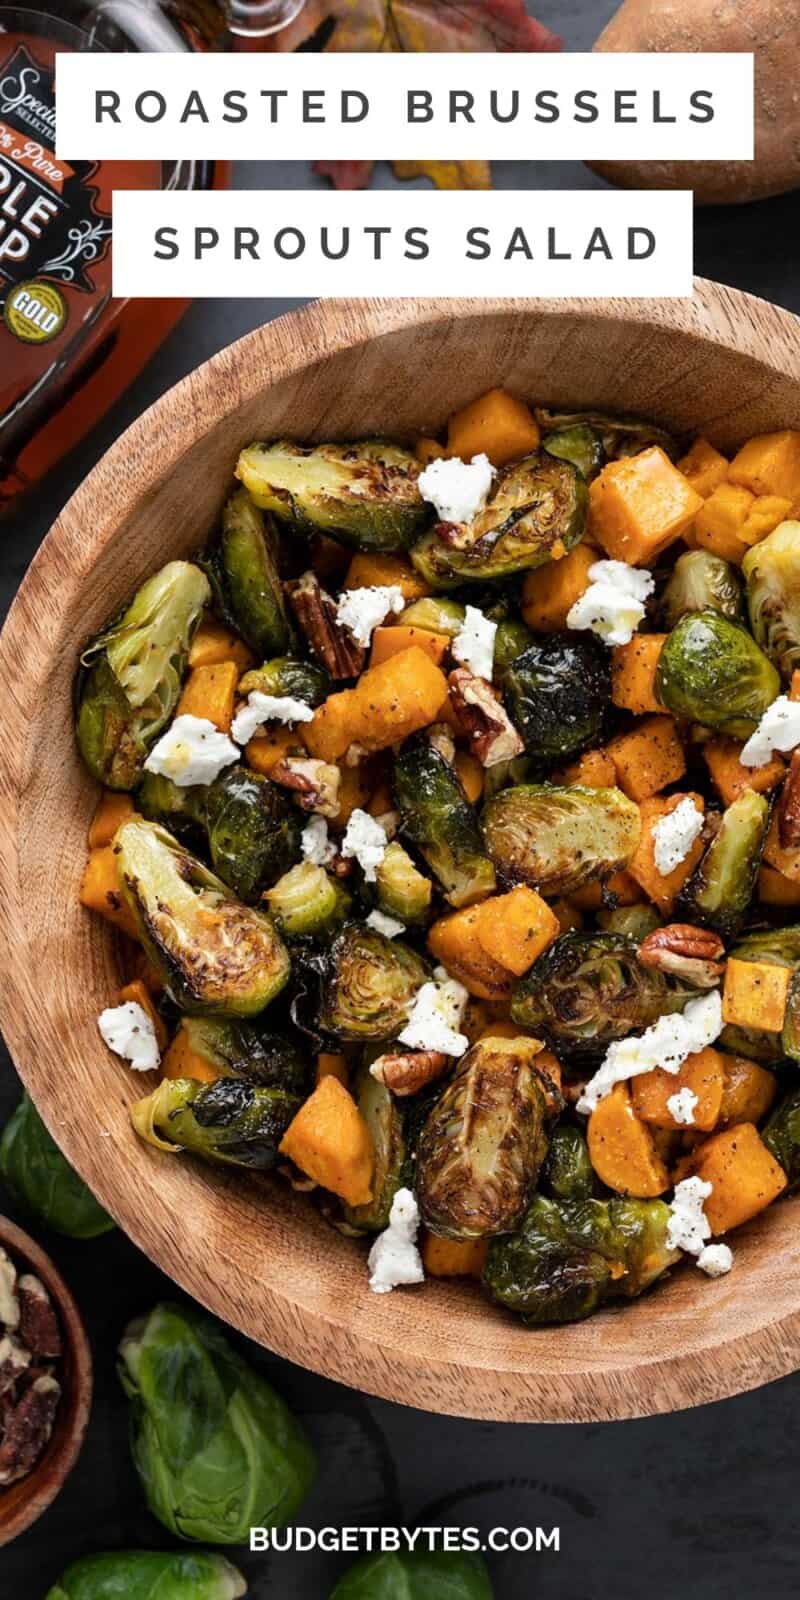 https://www.budgetbytes.com/wp-content/uploads/2022/10/Roasted-Brussels-Sprouts-Salad-PIN2-800x1600.jpg